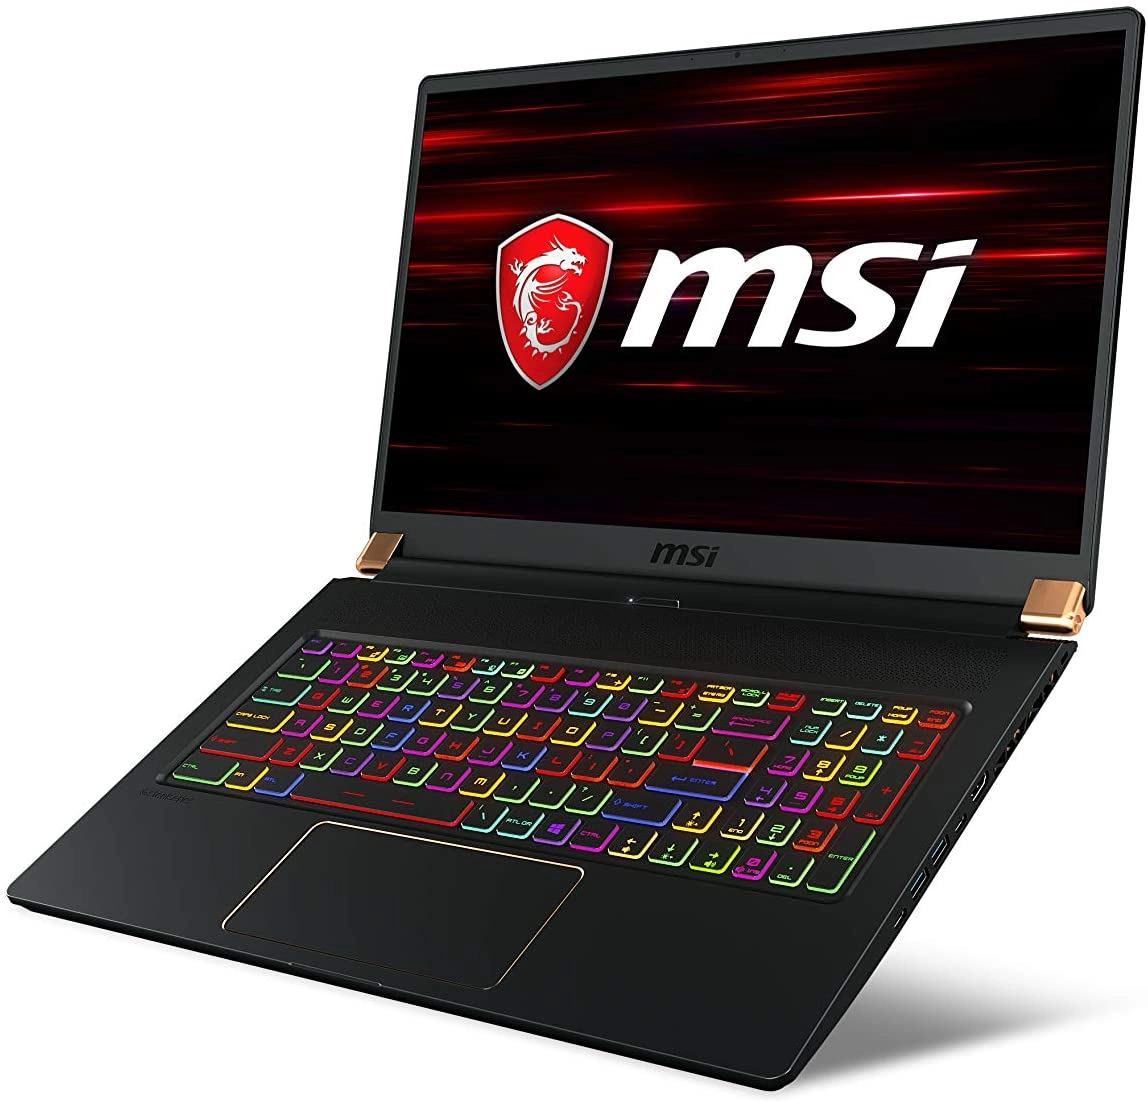 MSI GS75 Stealth 10SF-609 laptop image